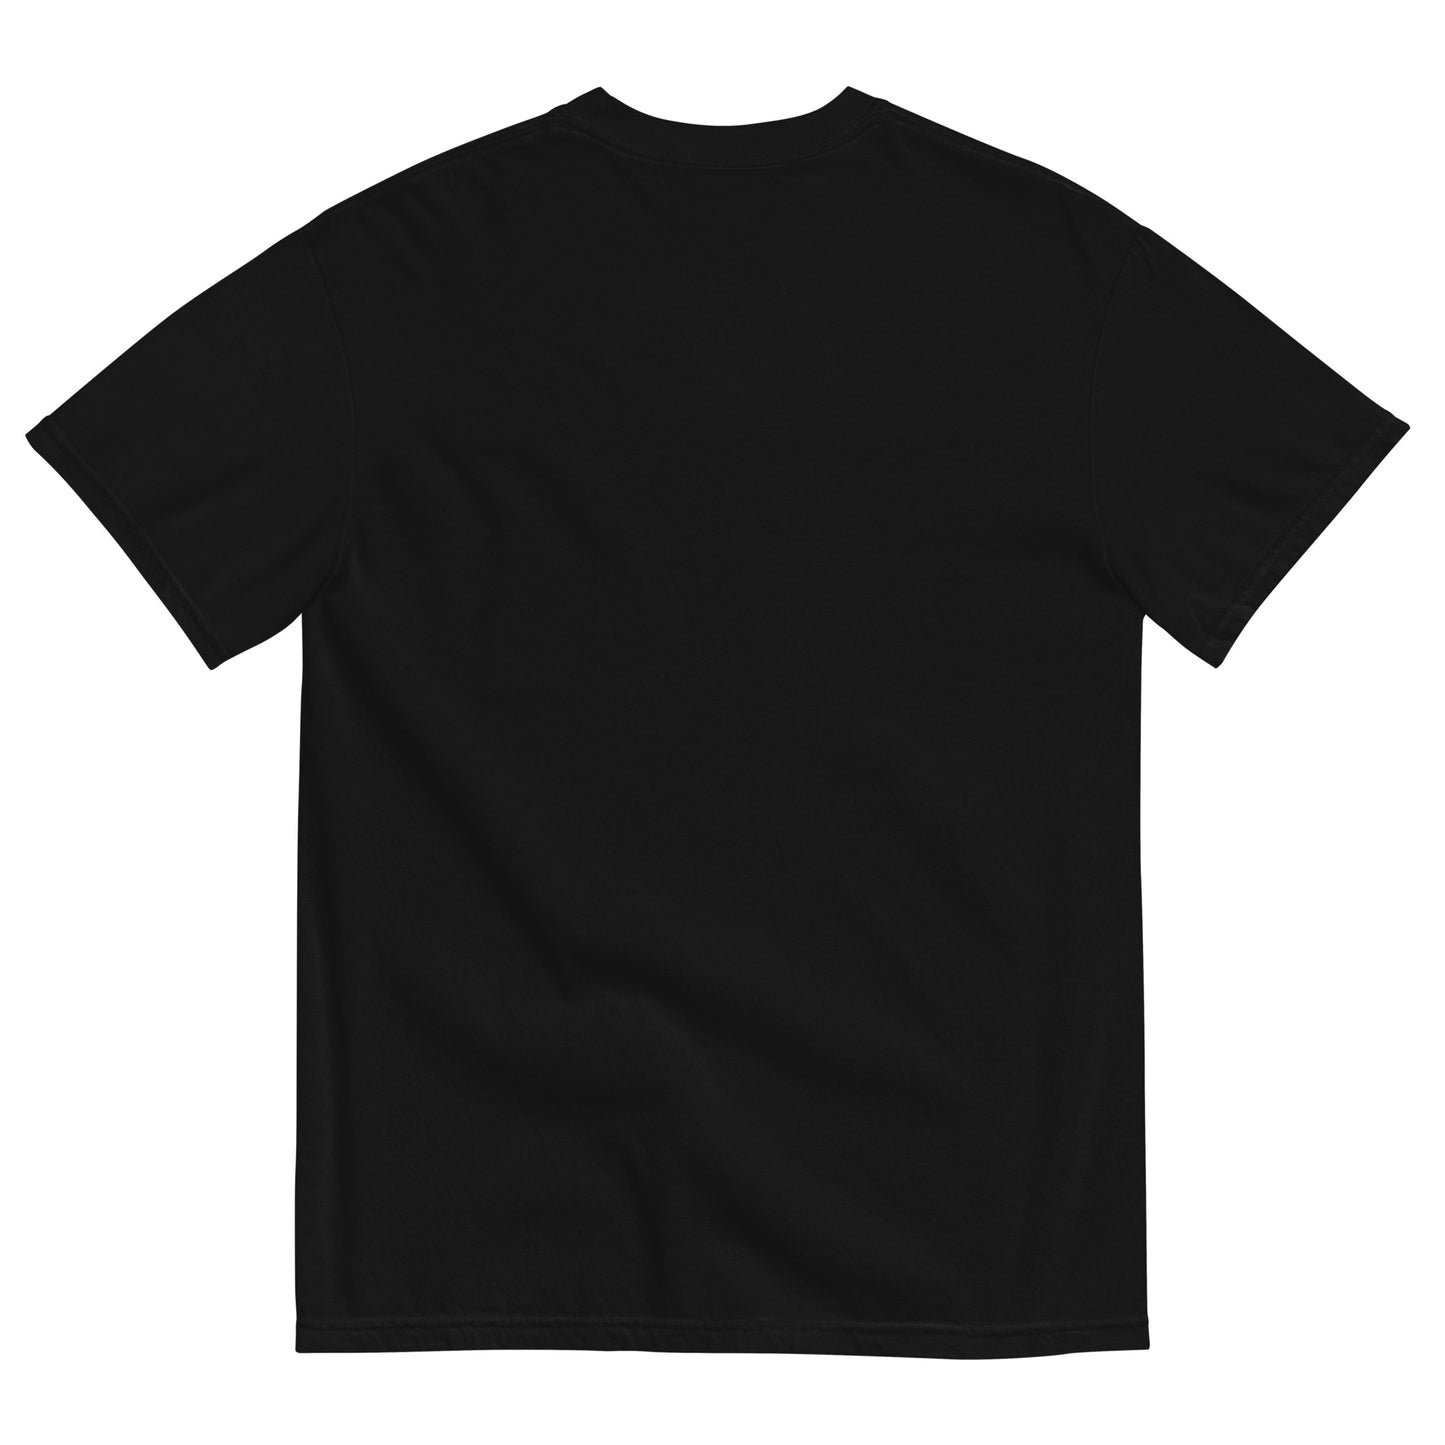 Ambition Embroidered Black T-shirt